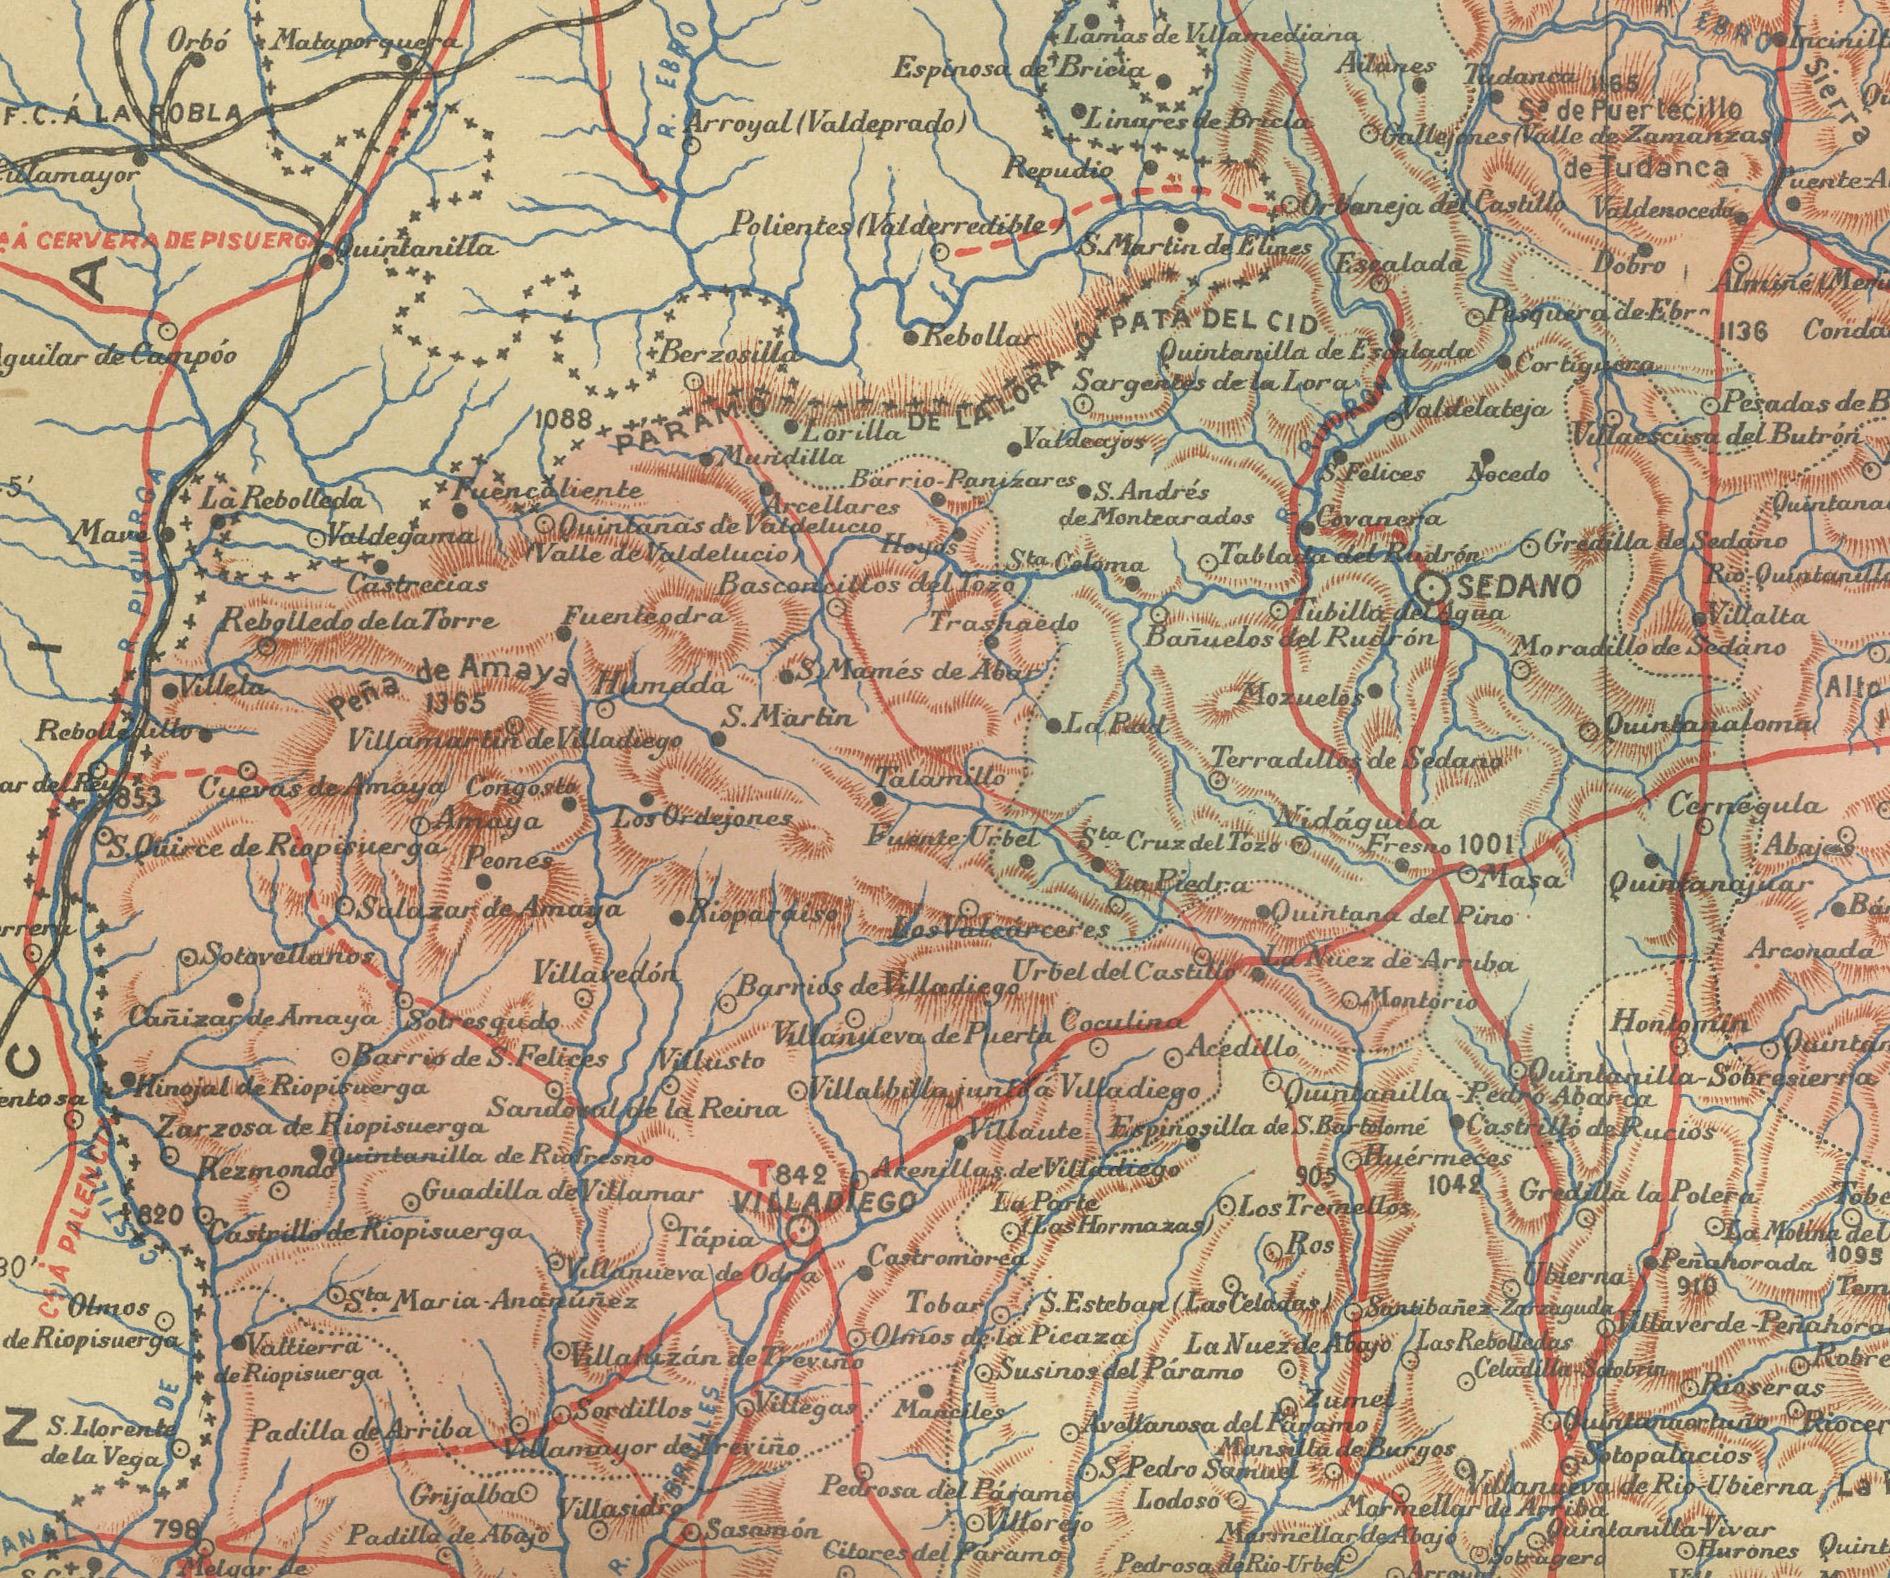 The map of the province of Burgos in the autonomous community of Castile and León in Spain, dated 1902. It includes the following features:

The map highlights the varied terrain with the northern part of the province being more mountainous, which